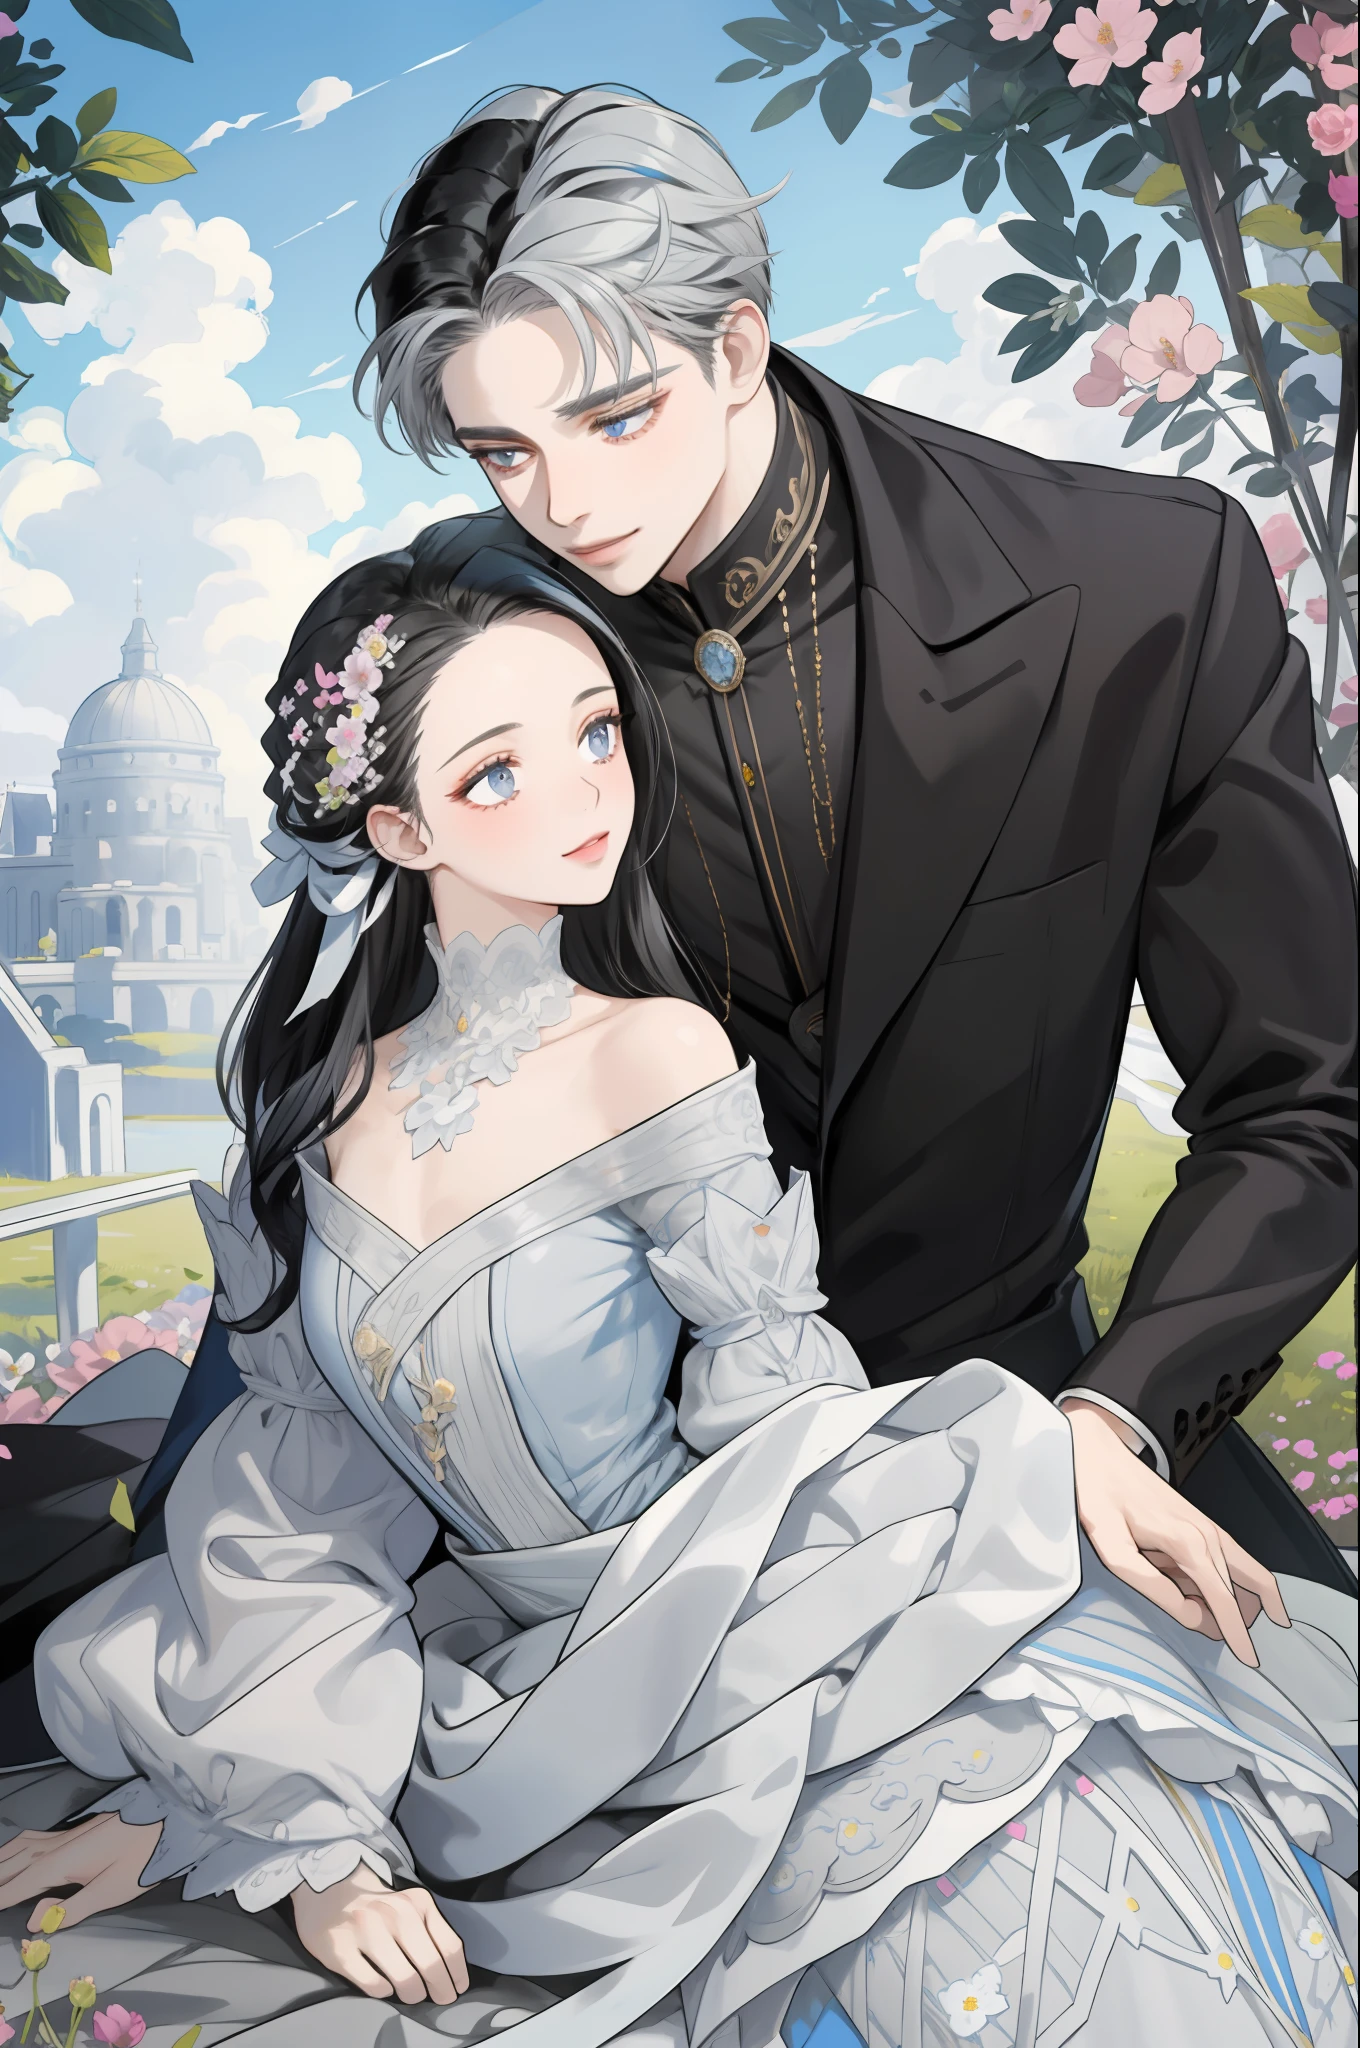 masterpiece, best quality, 2 others, couple, hetero, 1 man with 1 woman, silver and black hair, height difference, different colors, happy, love, landscape full of flowers, forehead, light blue and gray eyes,